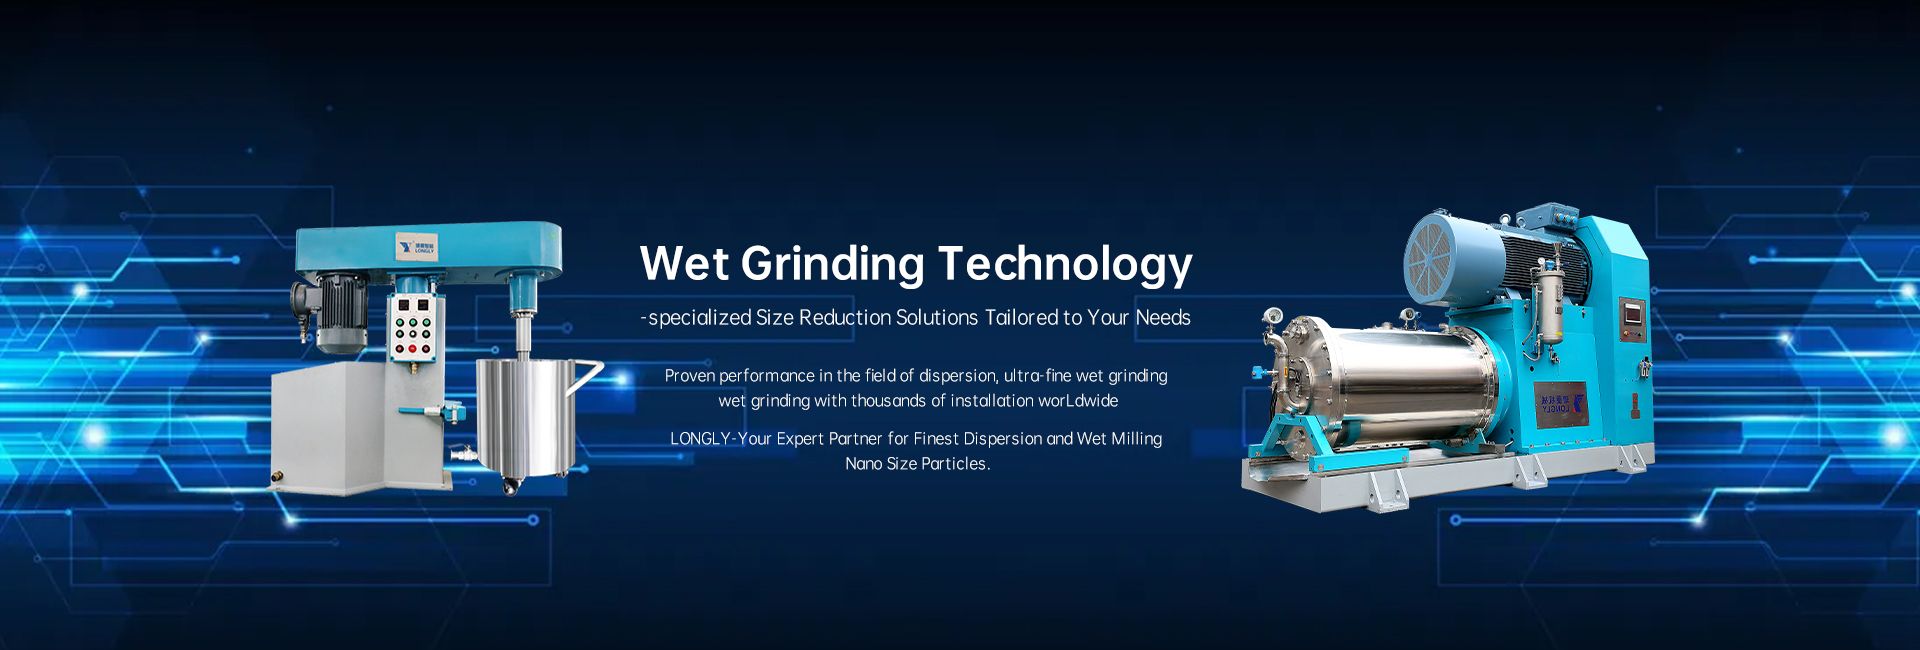 Top Wet Grinding Technology - LONGLY